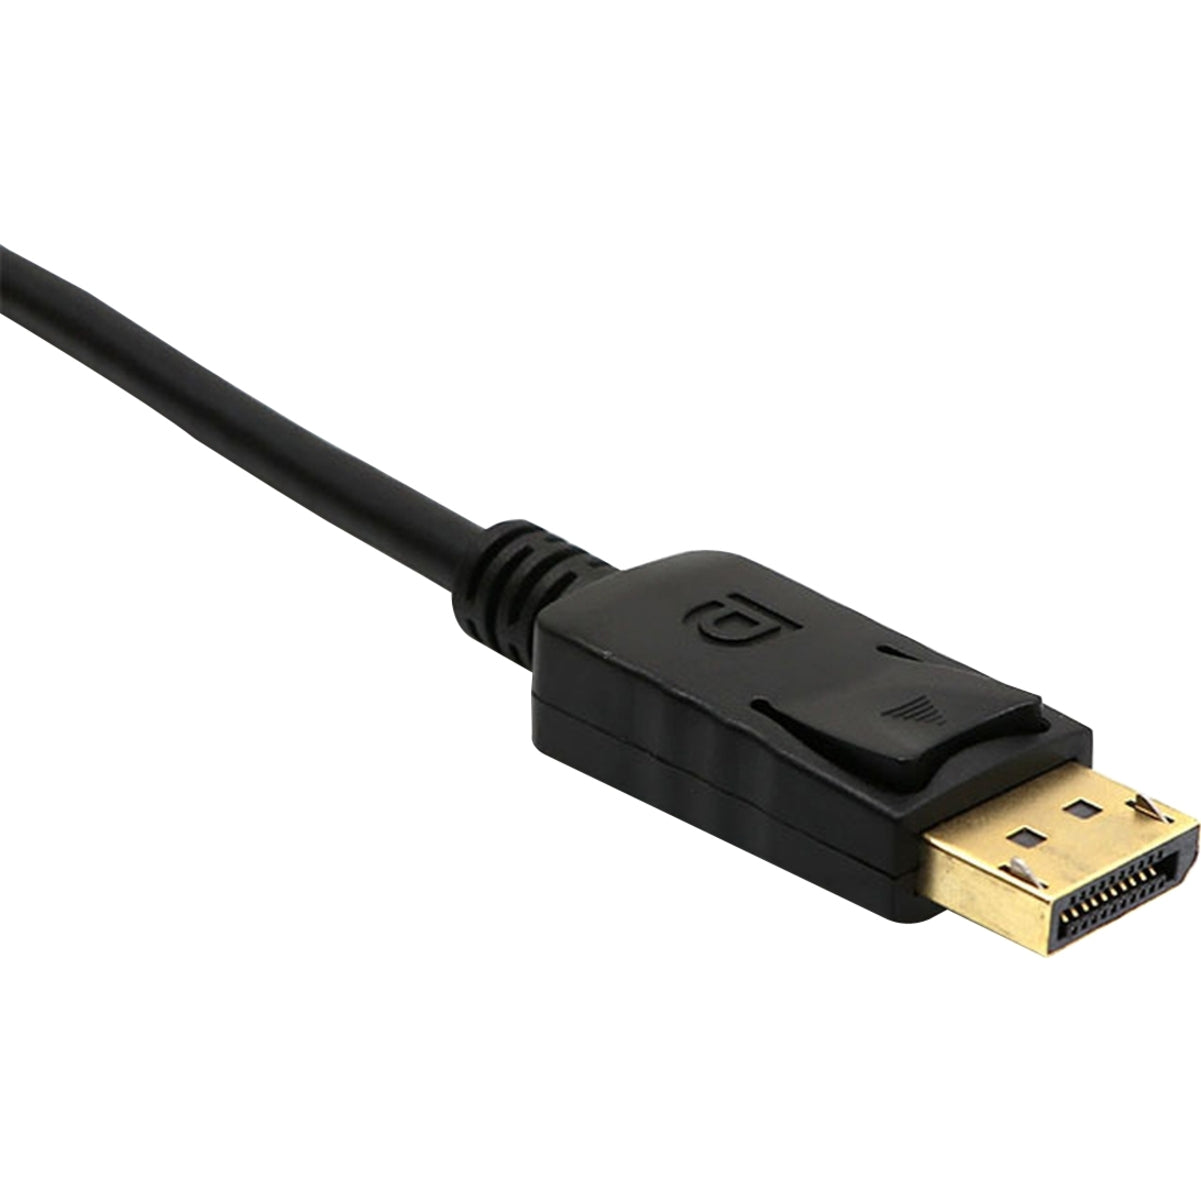 4XEM 4XDPHDMI3FT4K 4K Displayport to HDMI Cable 3ft, Active, 18 Gbit/s Data Transfer Rate